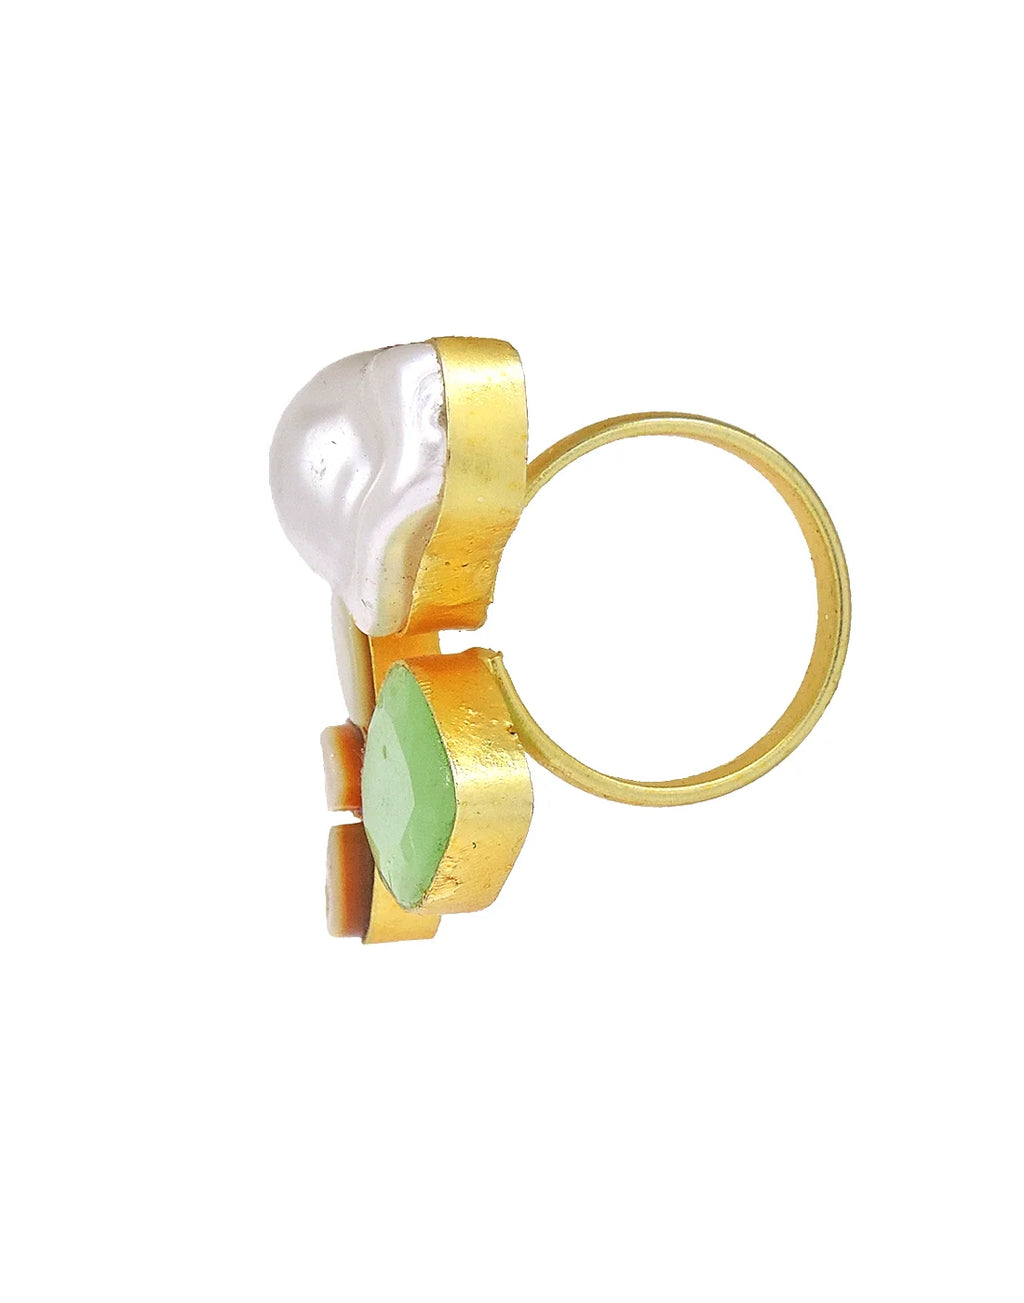 Glass & Pearl Ring- Handcrafted Jewellery from Dori